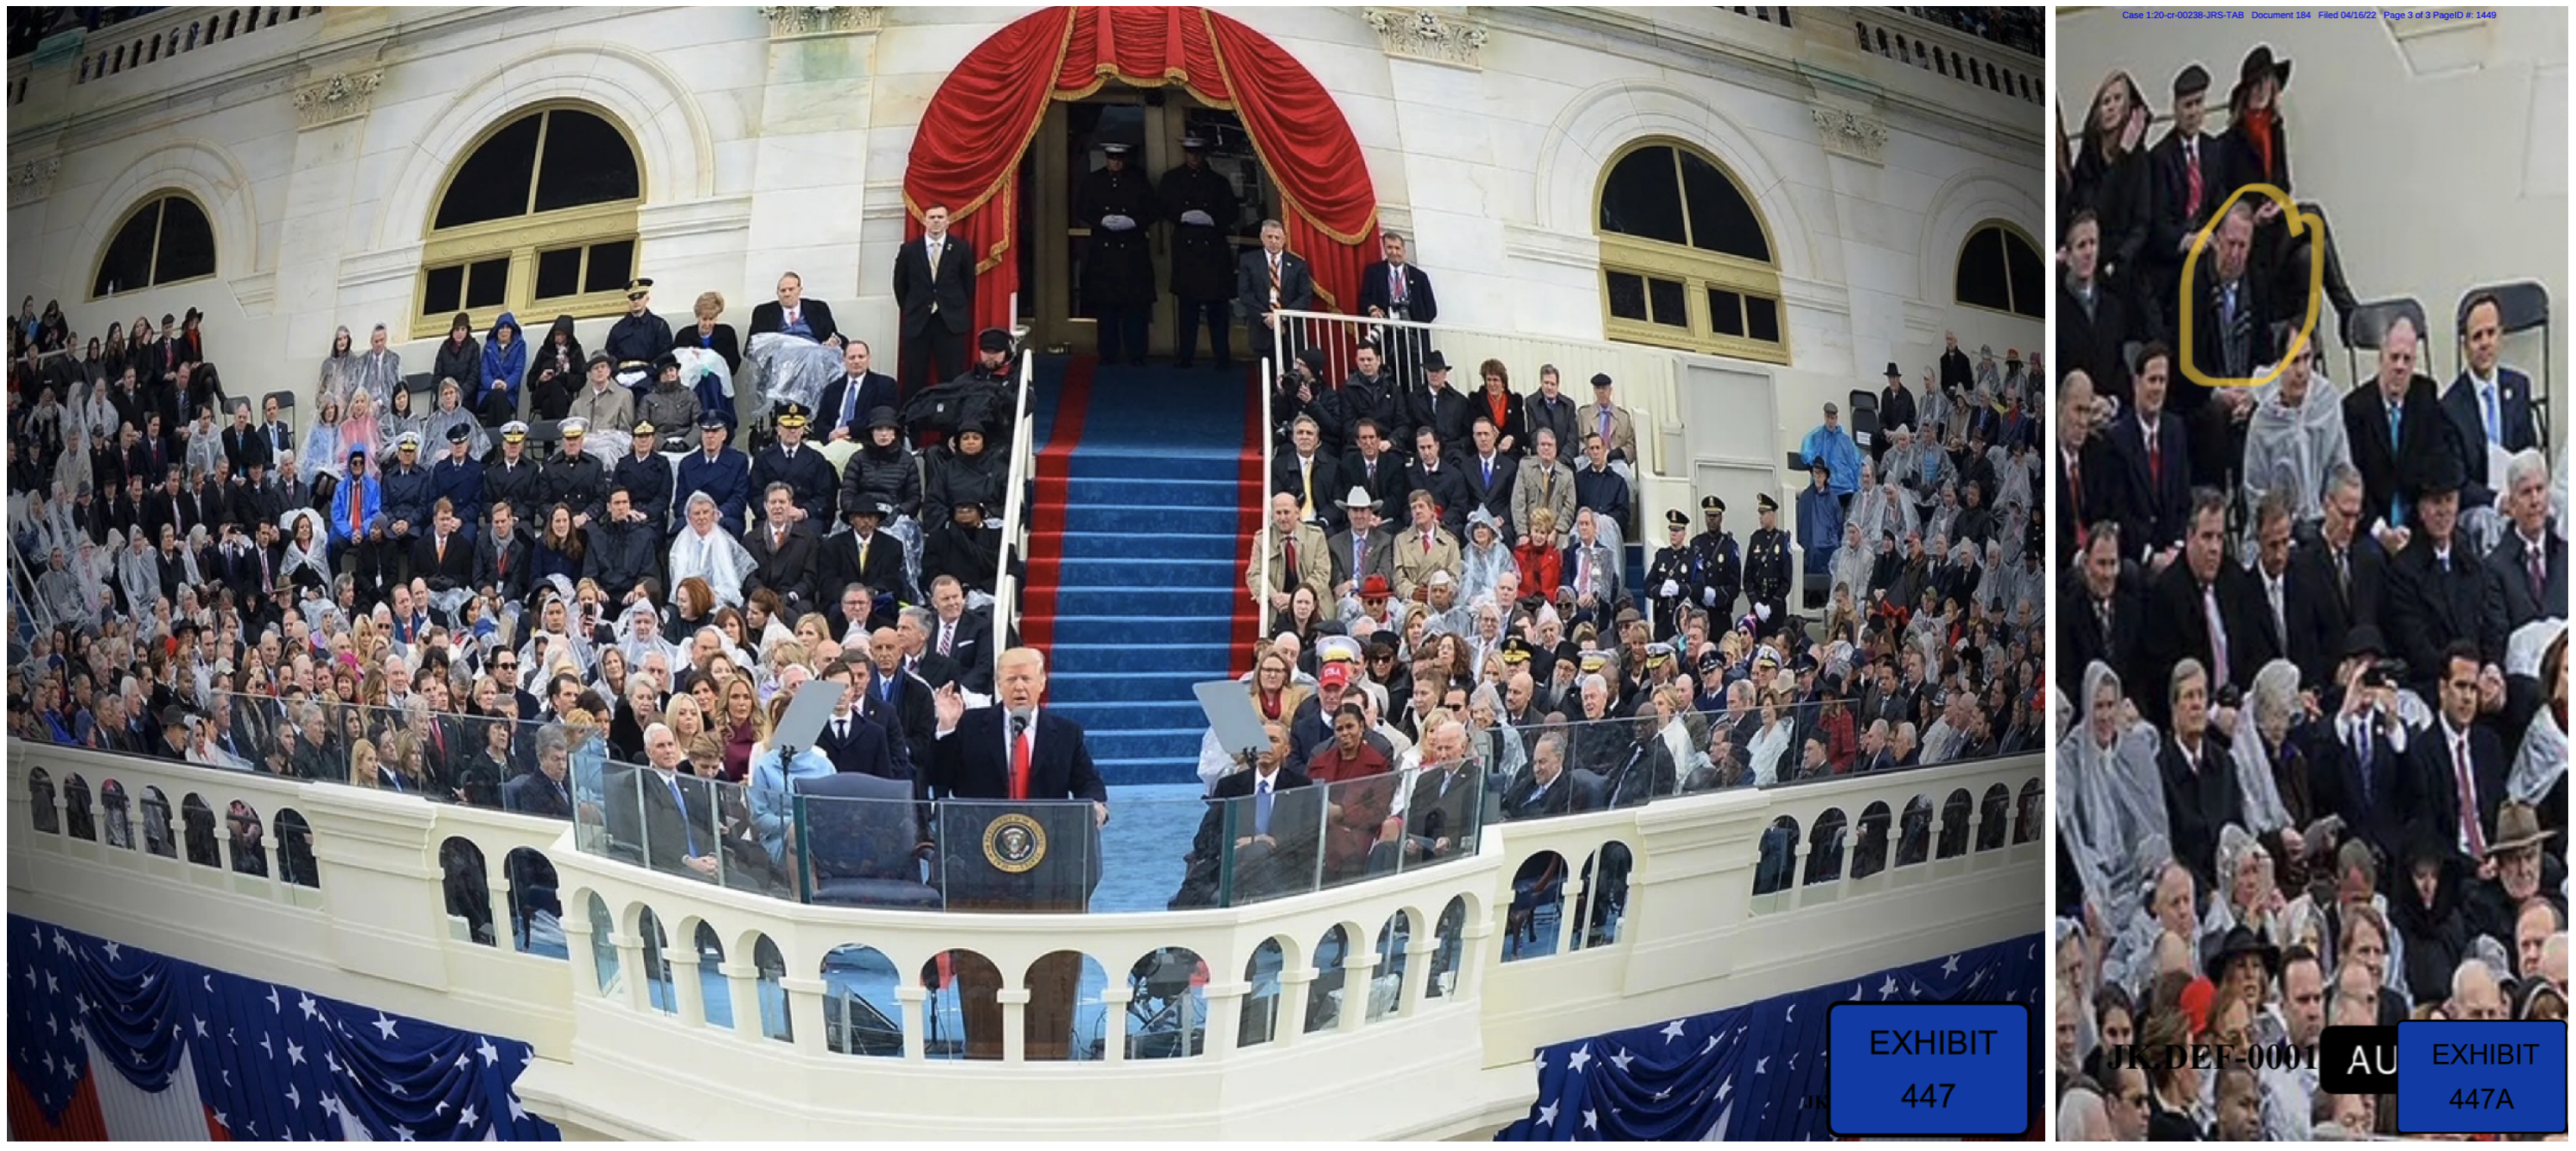 Trump Inauguration Pics May Be Shown in Indiana Casino Exec’s Trial